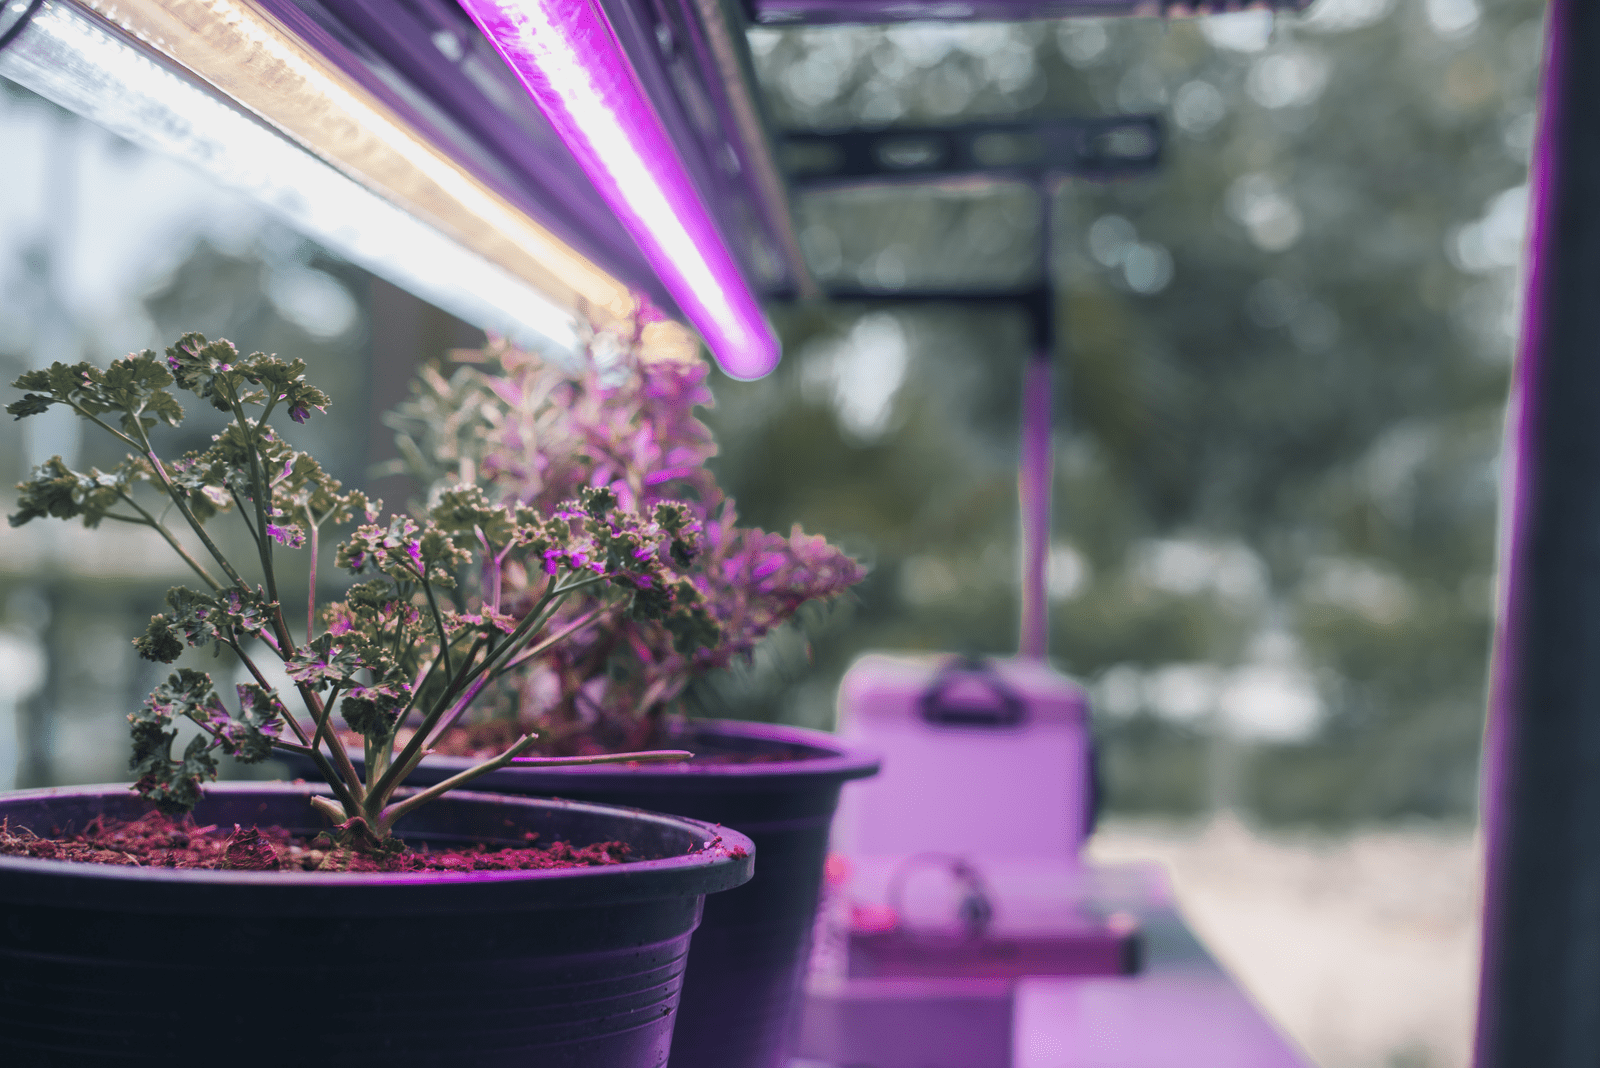 Need A Heat Lamp For Plants? Check Out Our Top 15 List